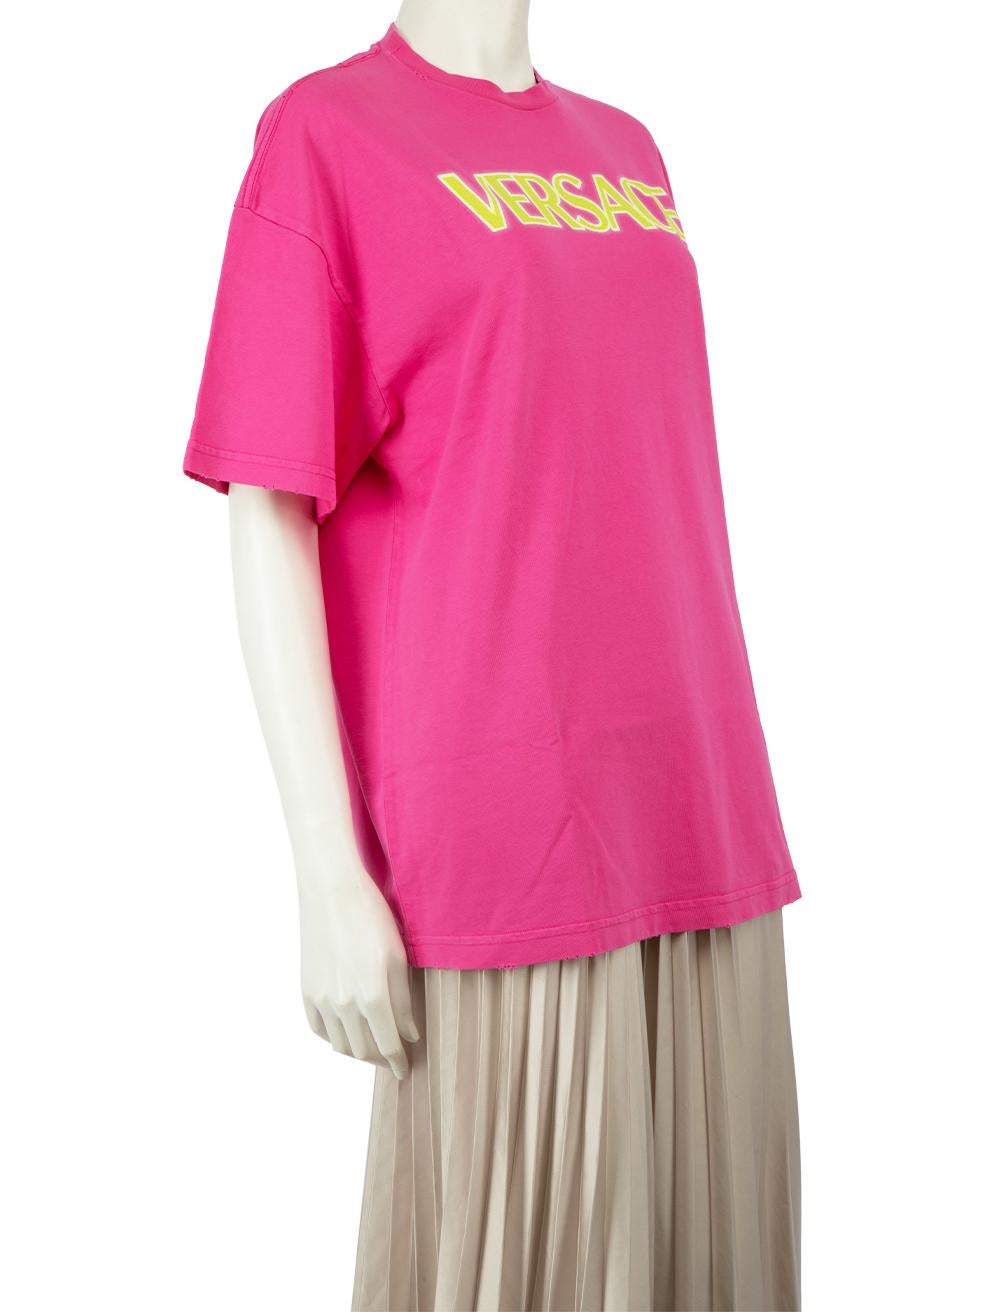 CONDITION is New with tags on this brand new Versace designer item. This item comes with original packaging.
 
 
 
 Details
 
 
 Model: 1008174
 
 Season: FW23
 
 Pink
 
 Cotton jersey
 
 T-Shirt
 
 Neon yellow vintage wash effect logo
 
 Oversized